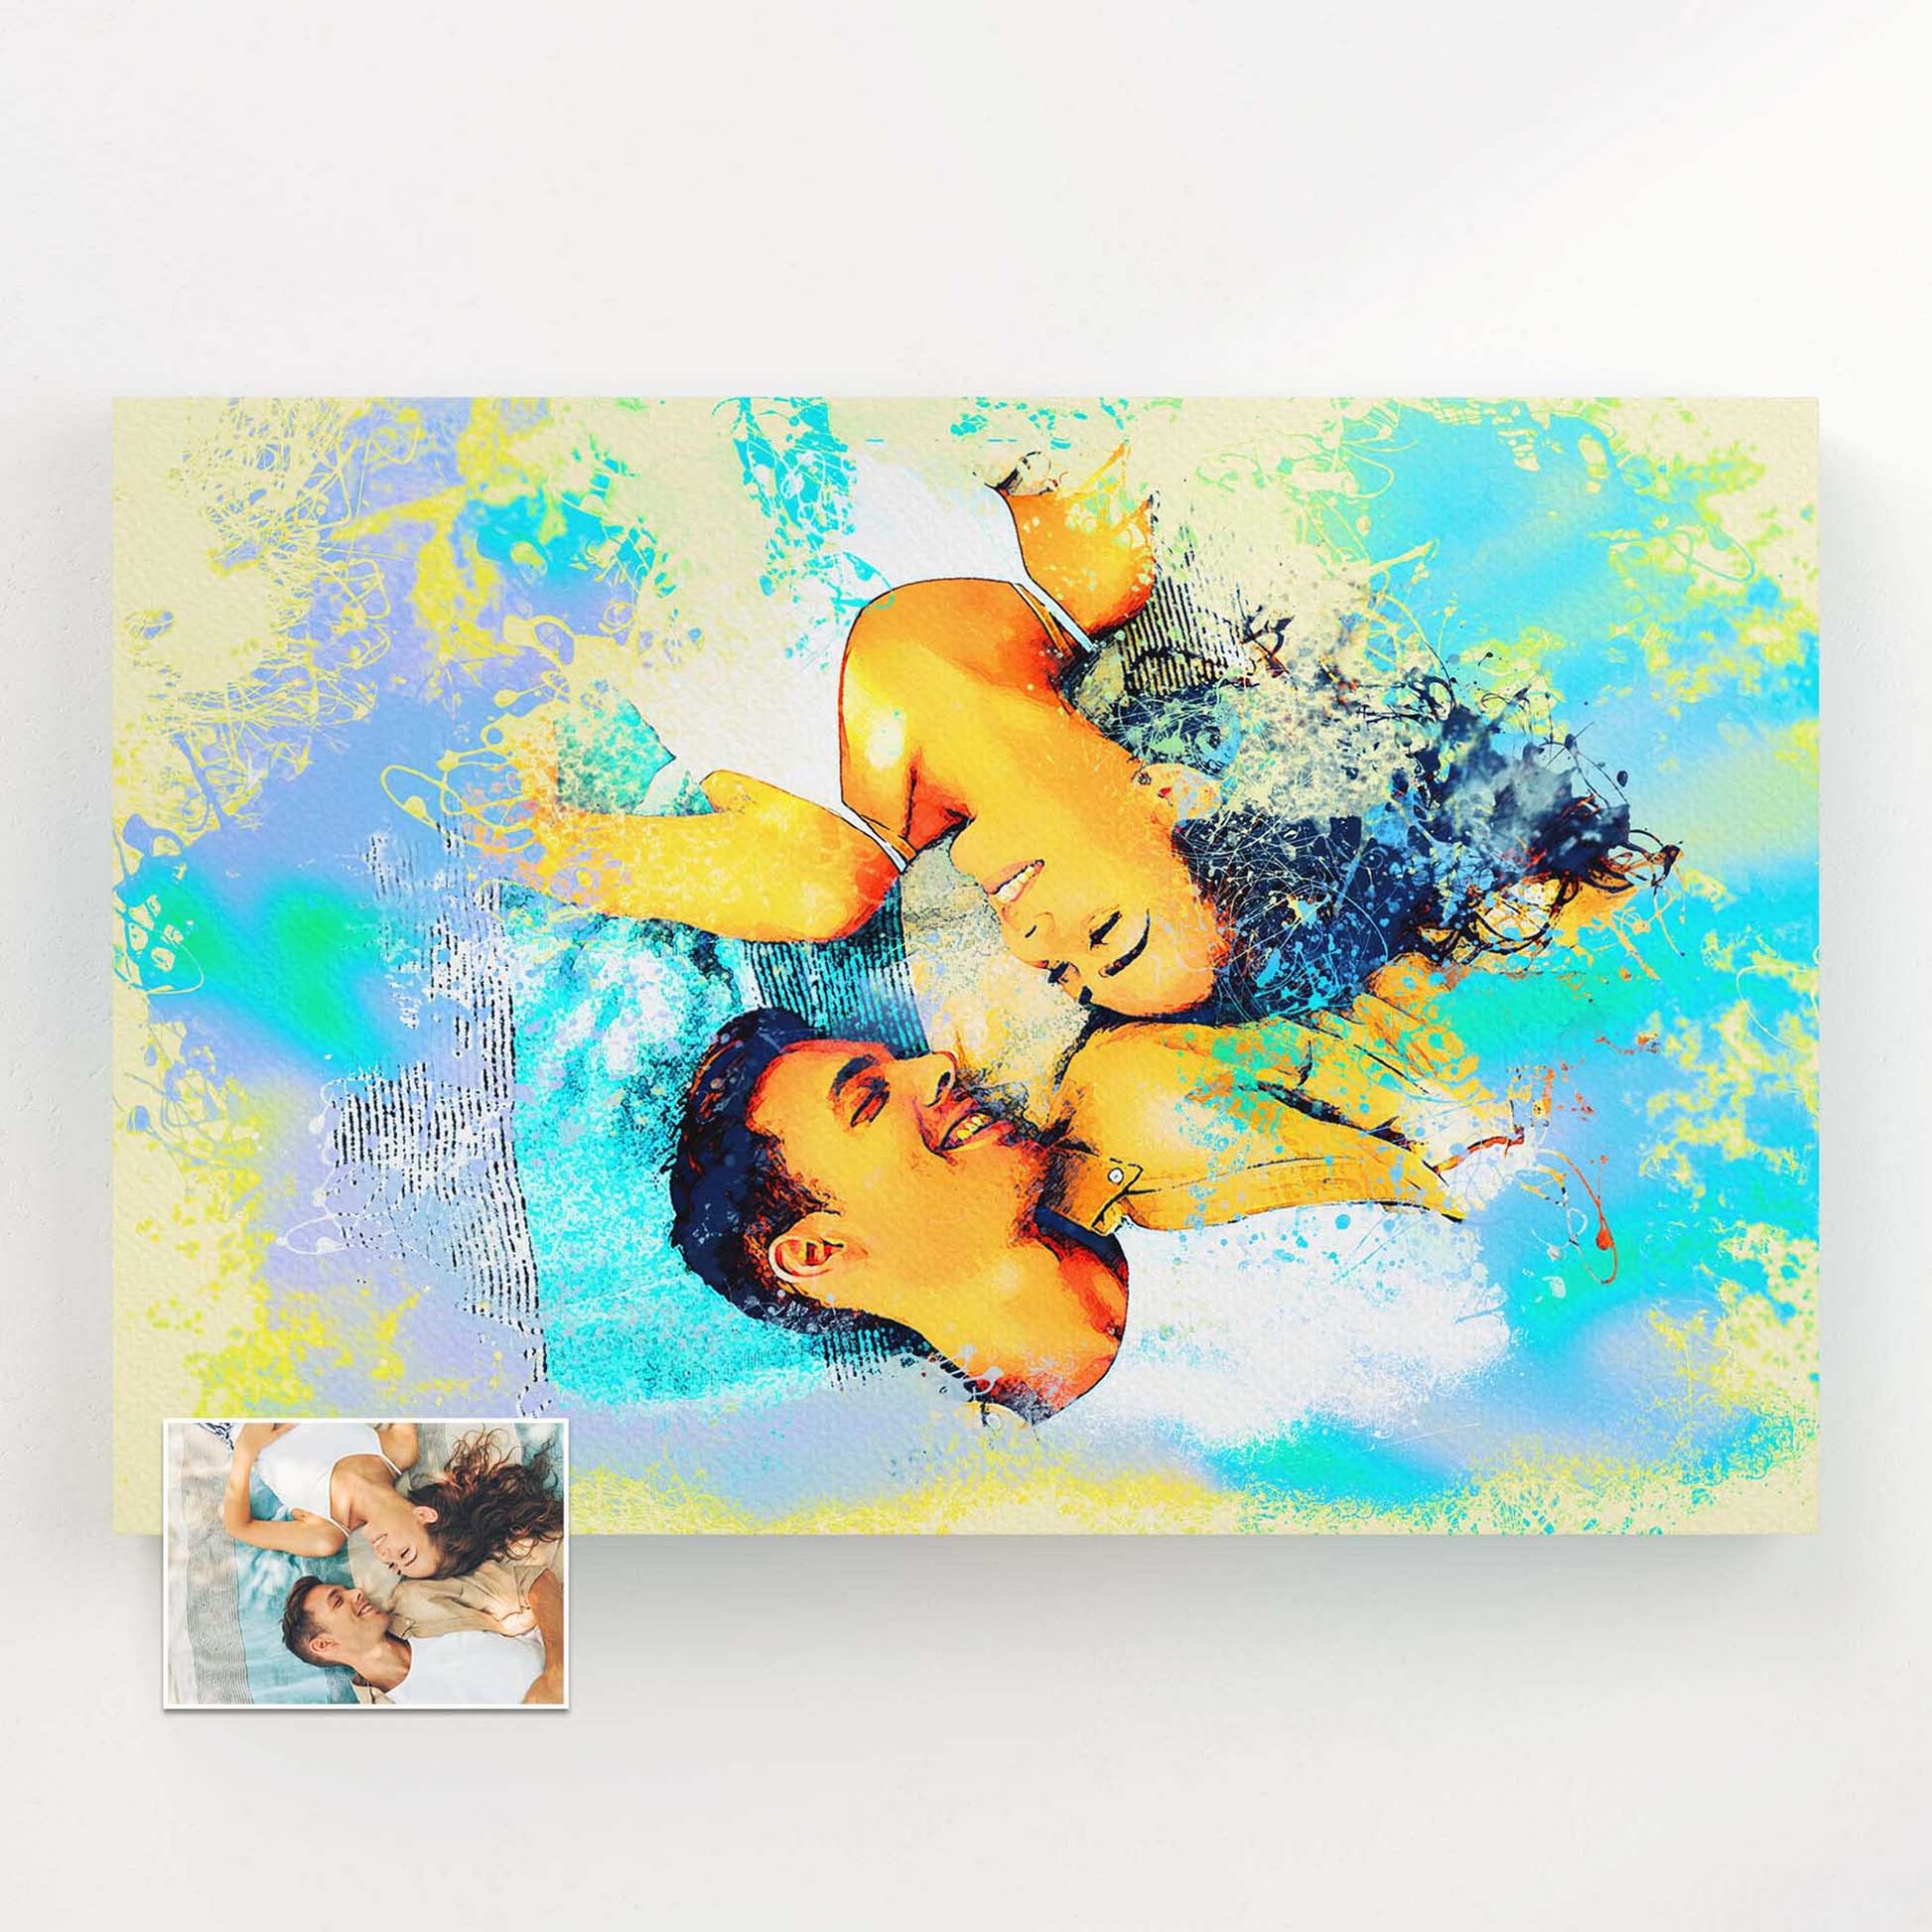 Dive into a world of color and creativity with a personalized Splash Watercolor Canvas